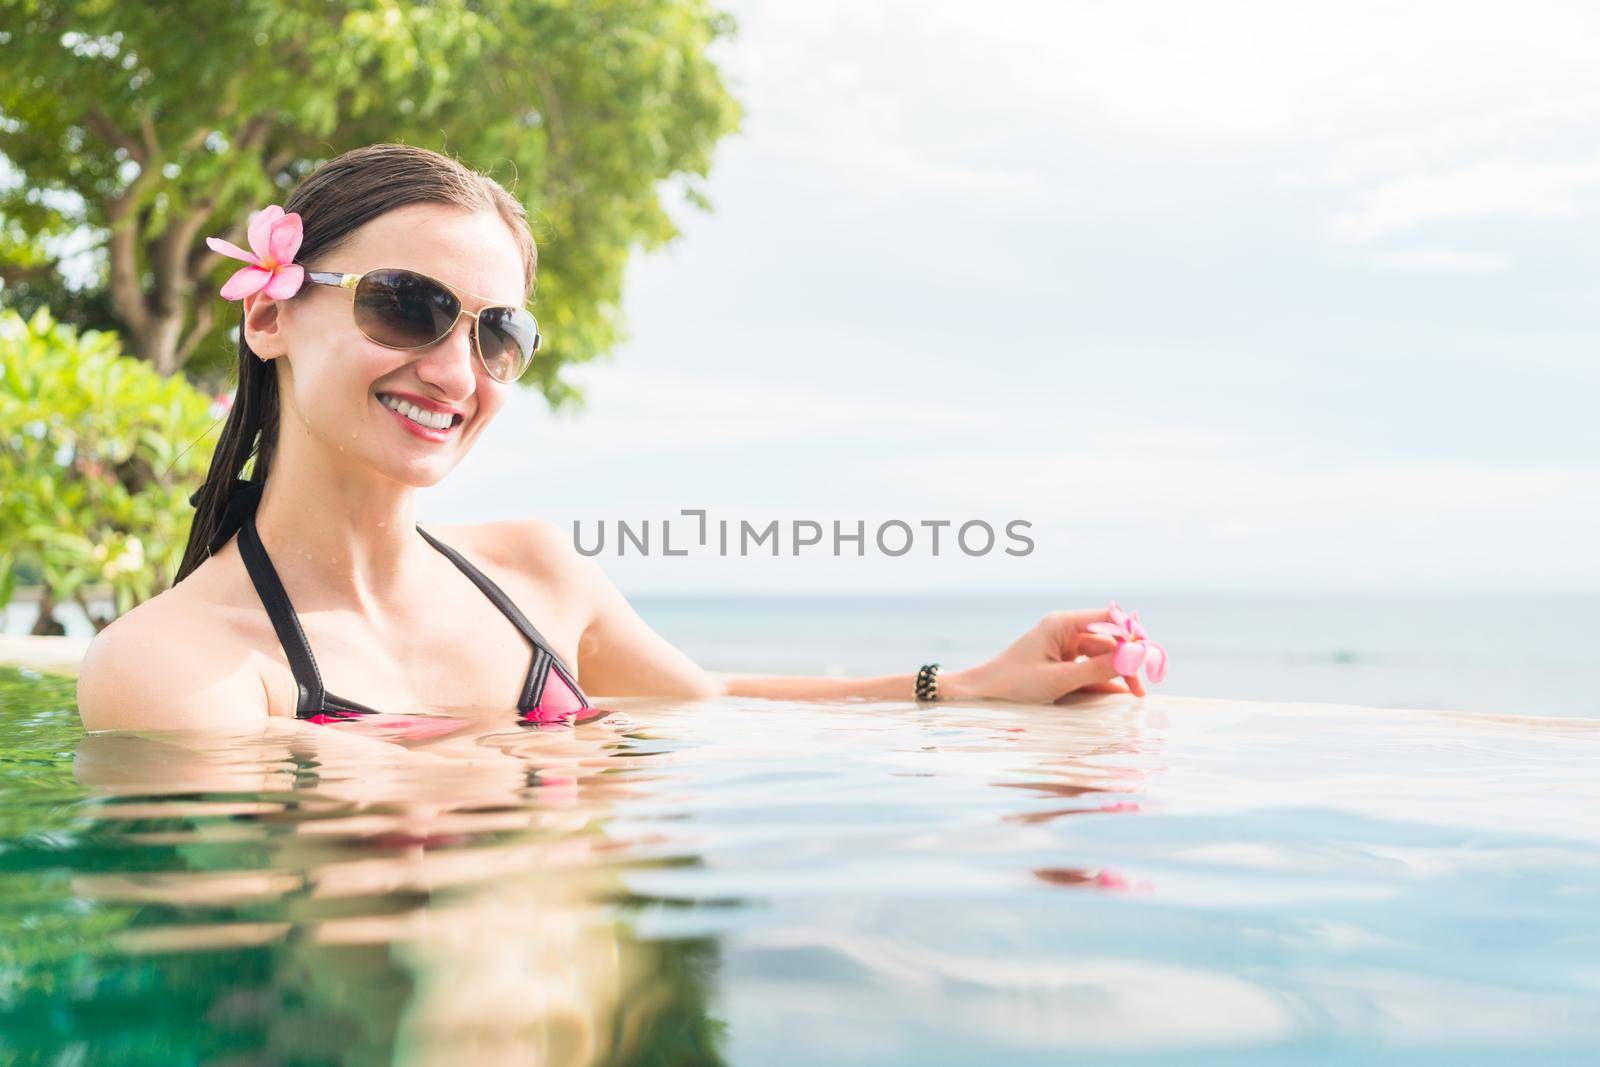 Woman in summer vacation relaxing swimming in pool with the ocean in the background